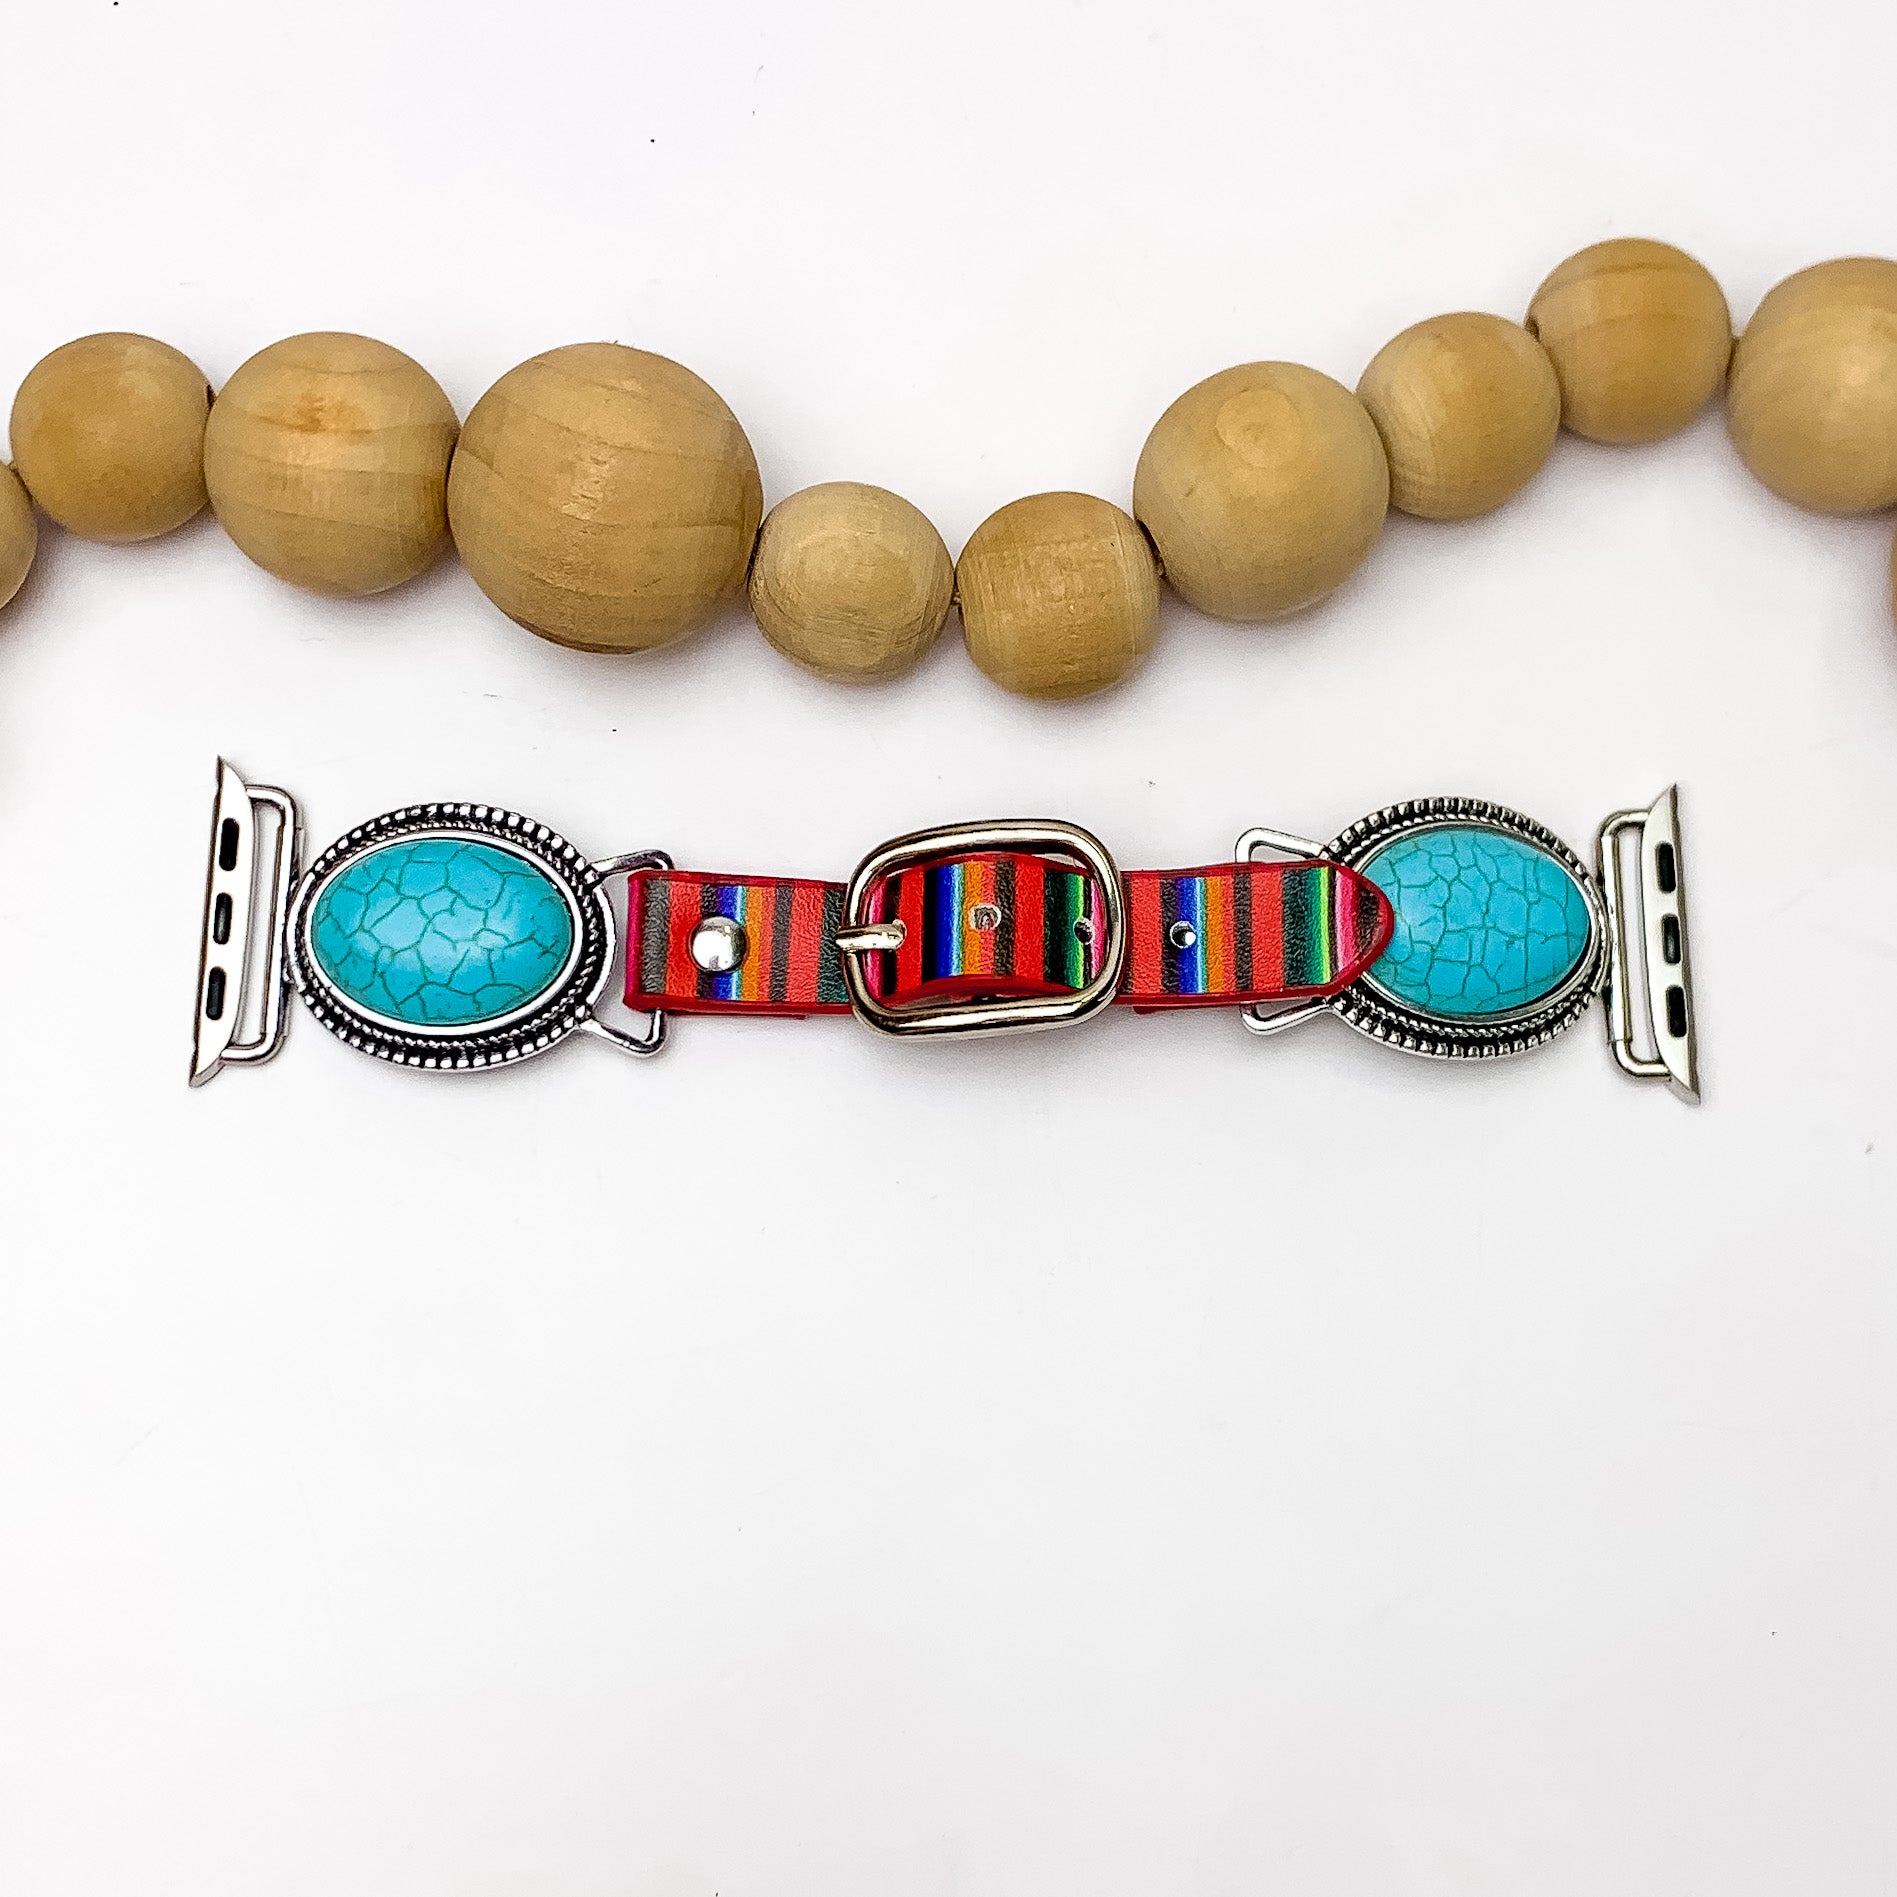 Turquoise Oval Stone Watch Band With Colorful Stripes. Pictured on a white background with wood beads above the band. 